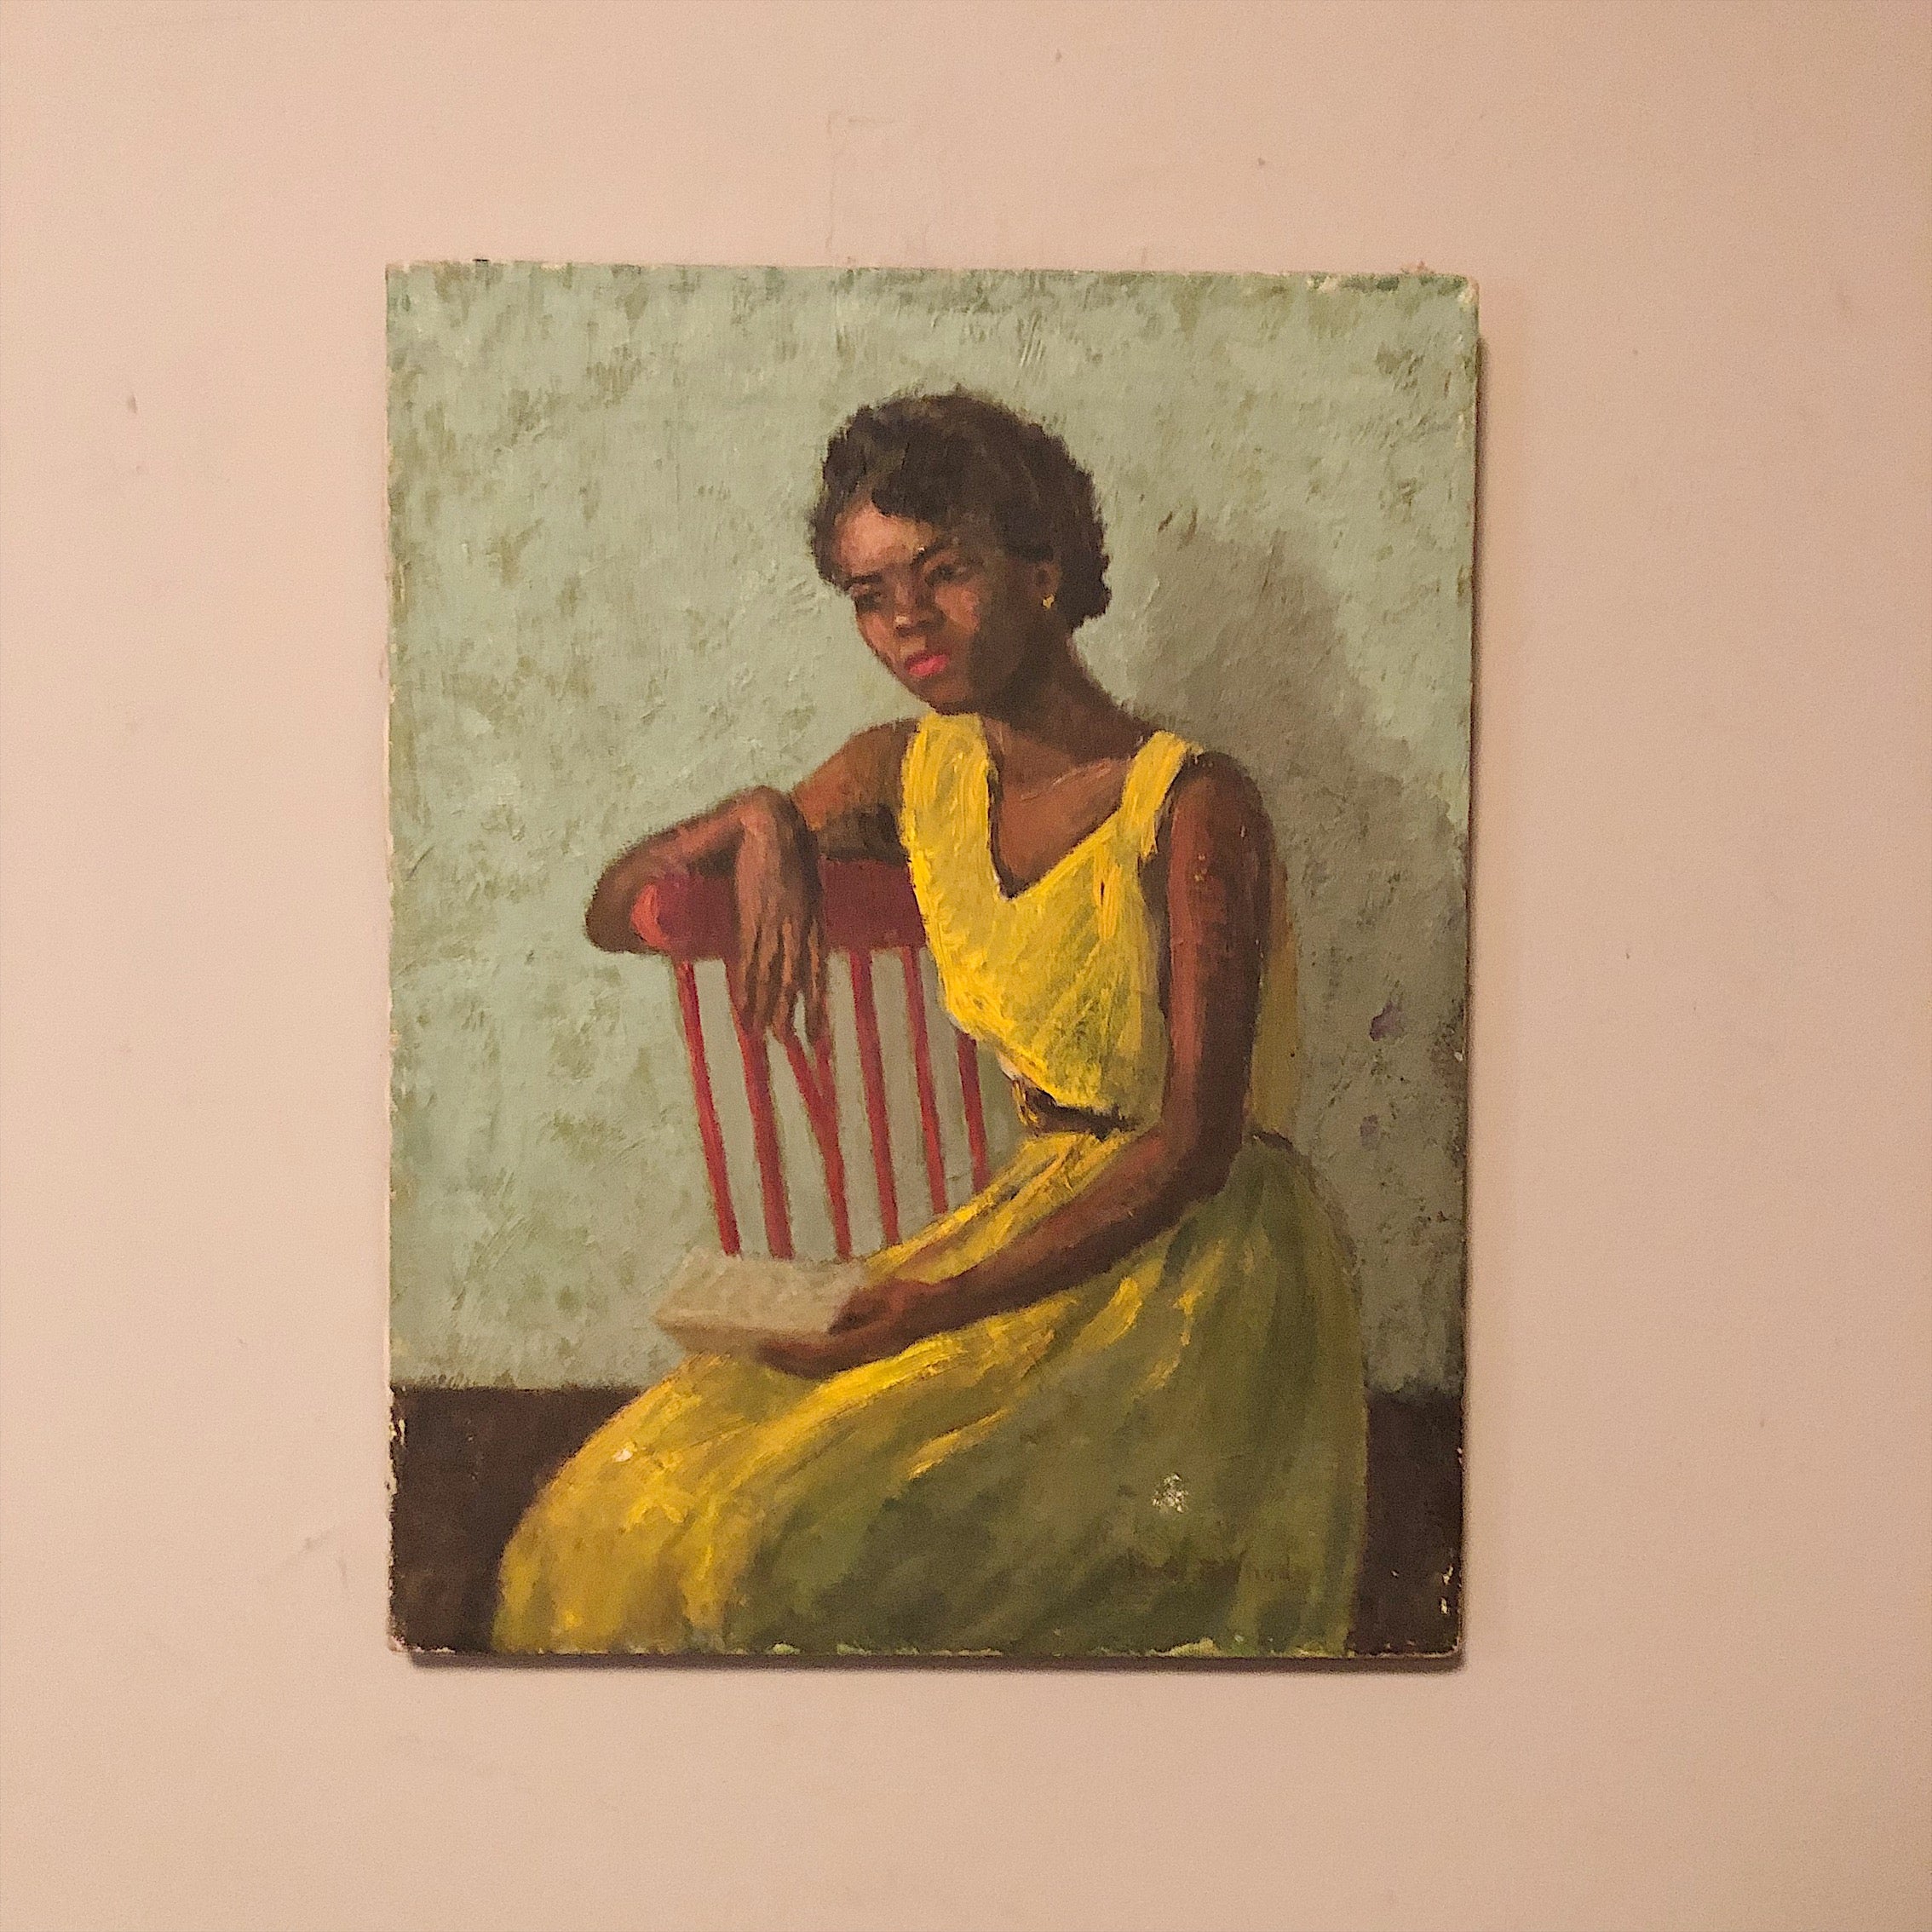 WPA Era Painting of African American Woman - Rare Portrait Oil on Canvas Paintings - Signed Mae Berlind - New York Artist - Vintage 